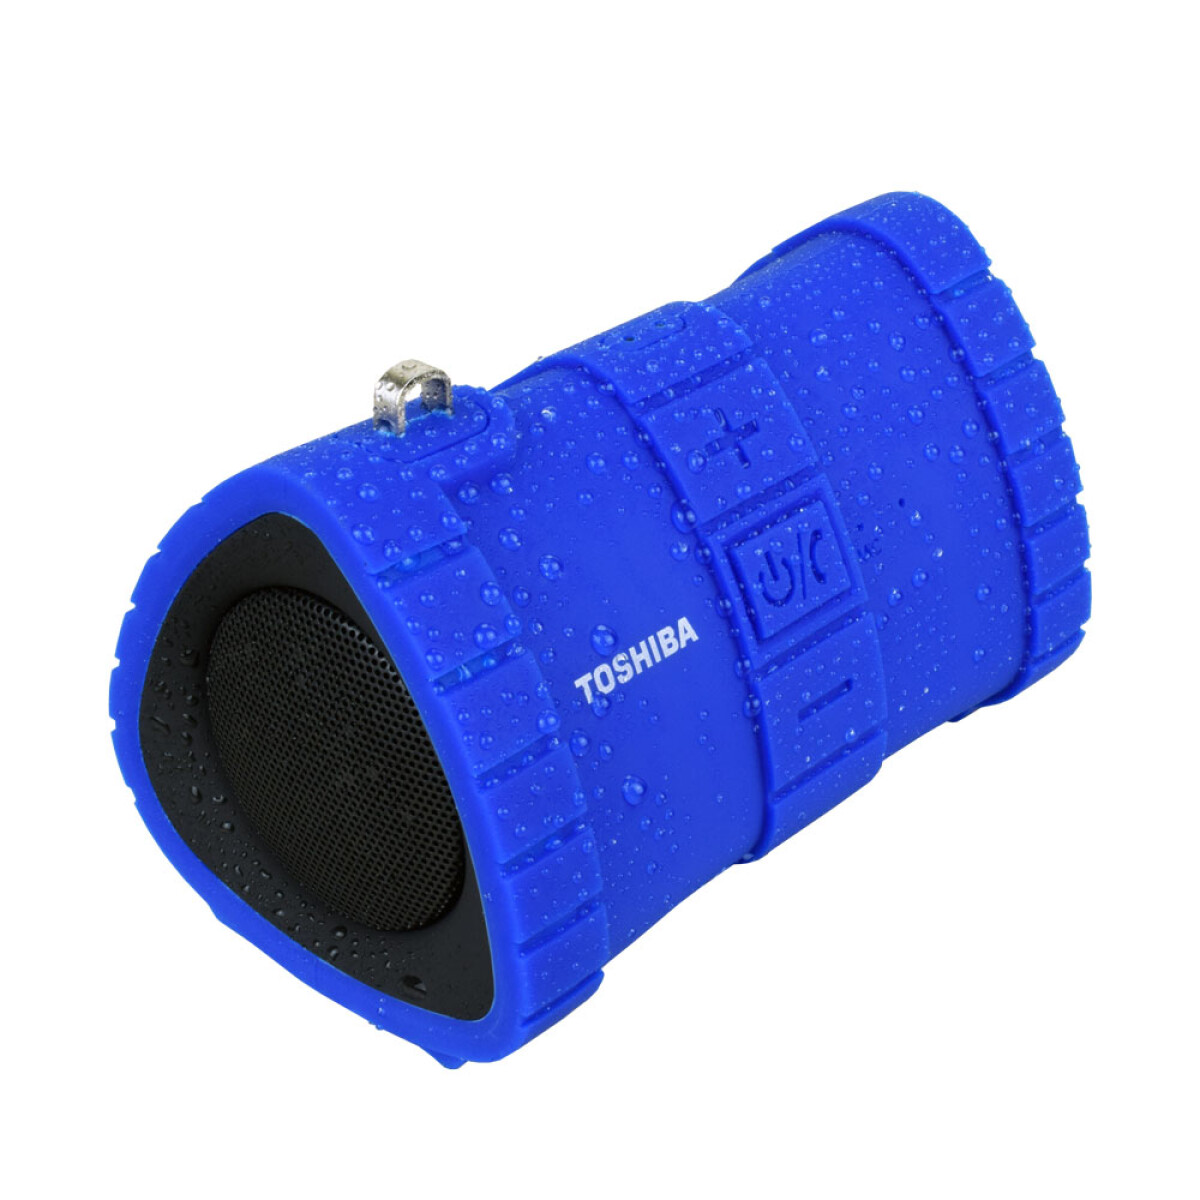 Reproductor Bt Toshiba Water Proof Wsp100 Azul 